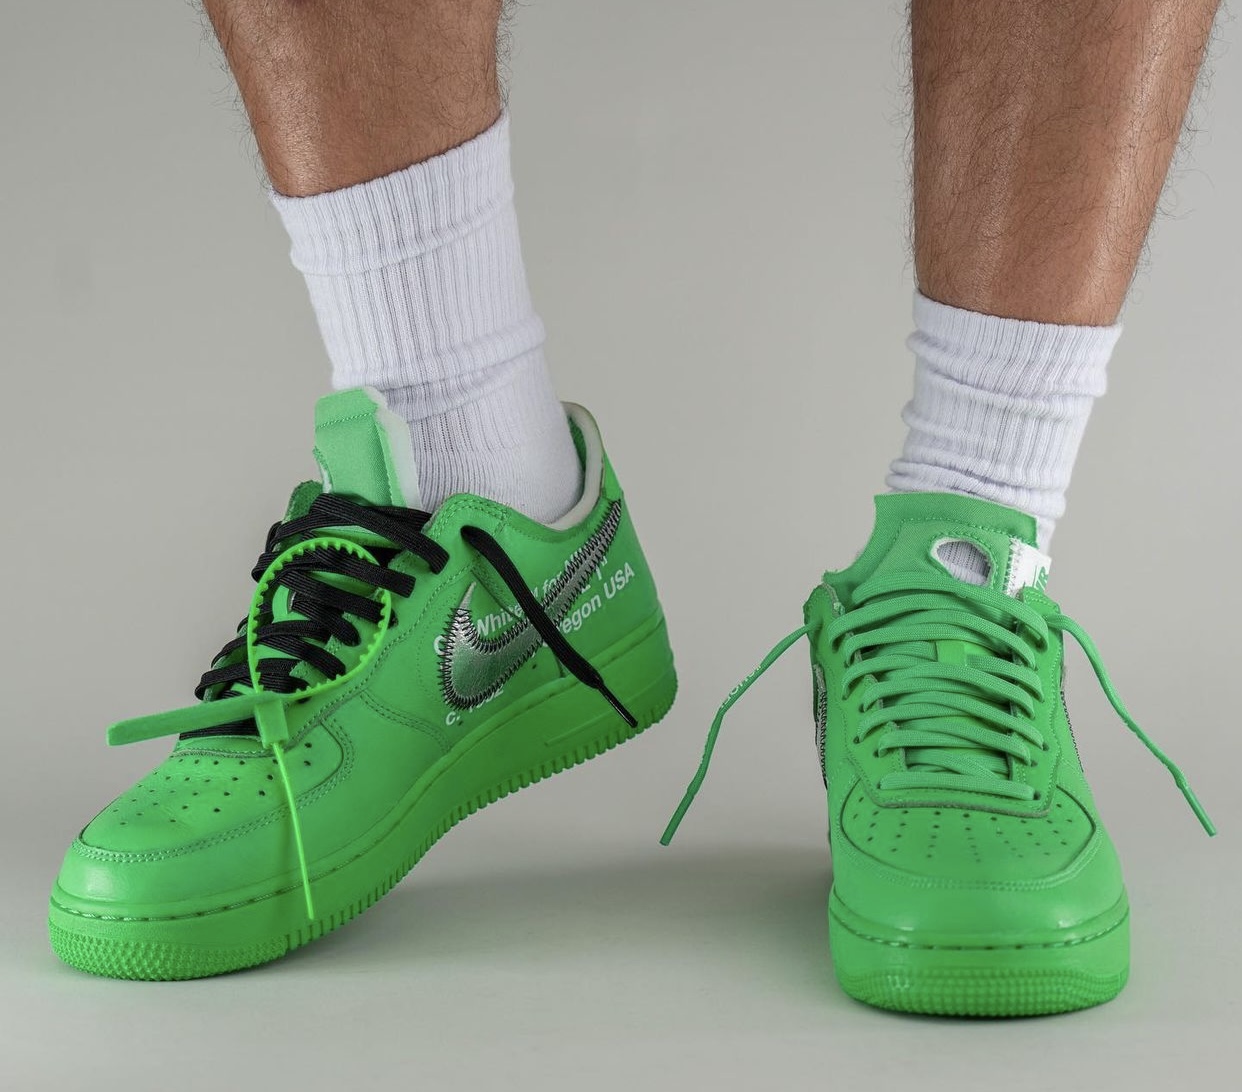 Off-White Nike Air Force 1 Low Light Green Spark On-Feet DX1419-300 Release Date